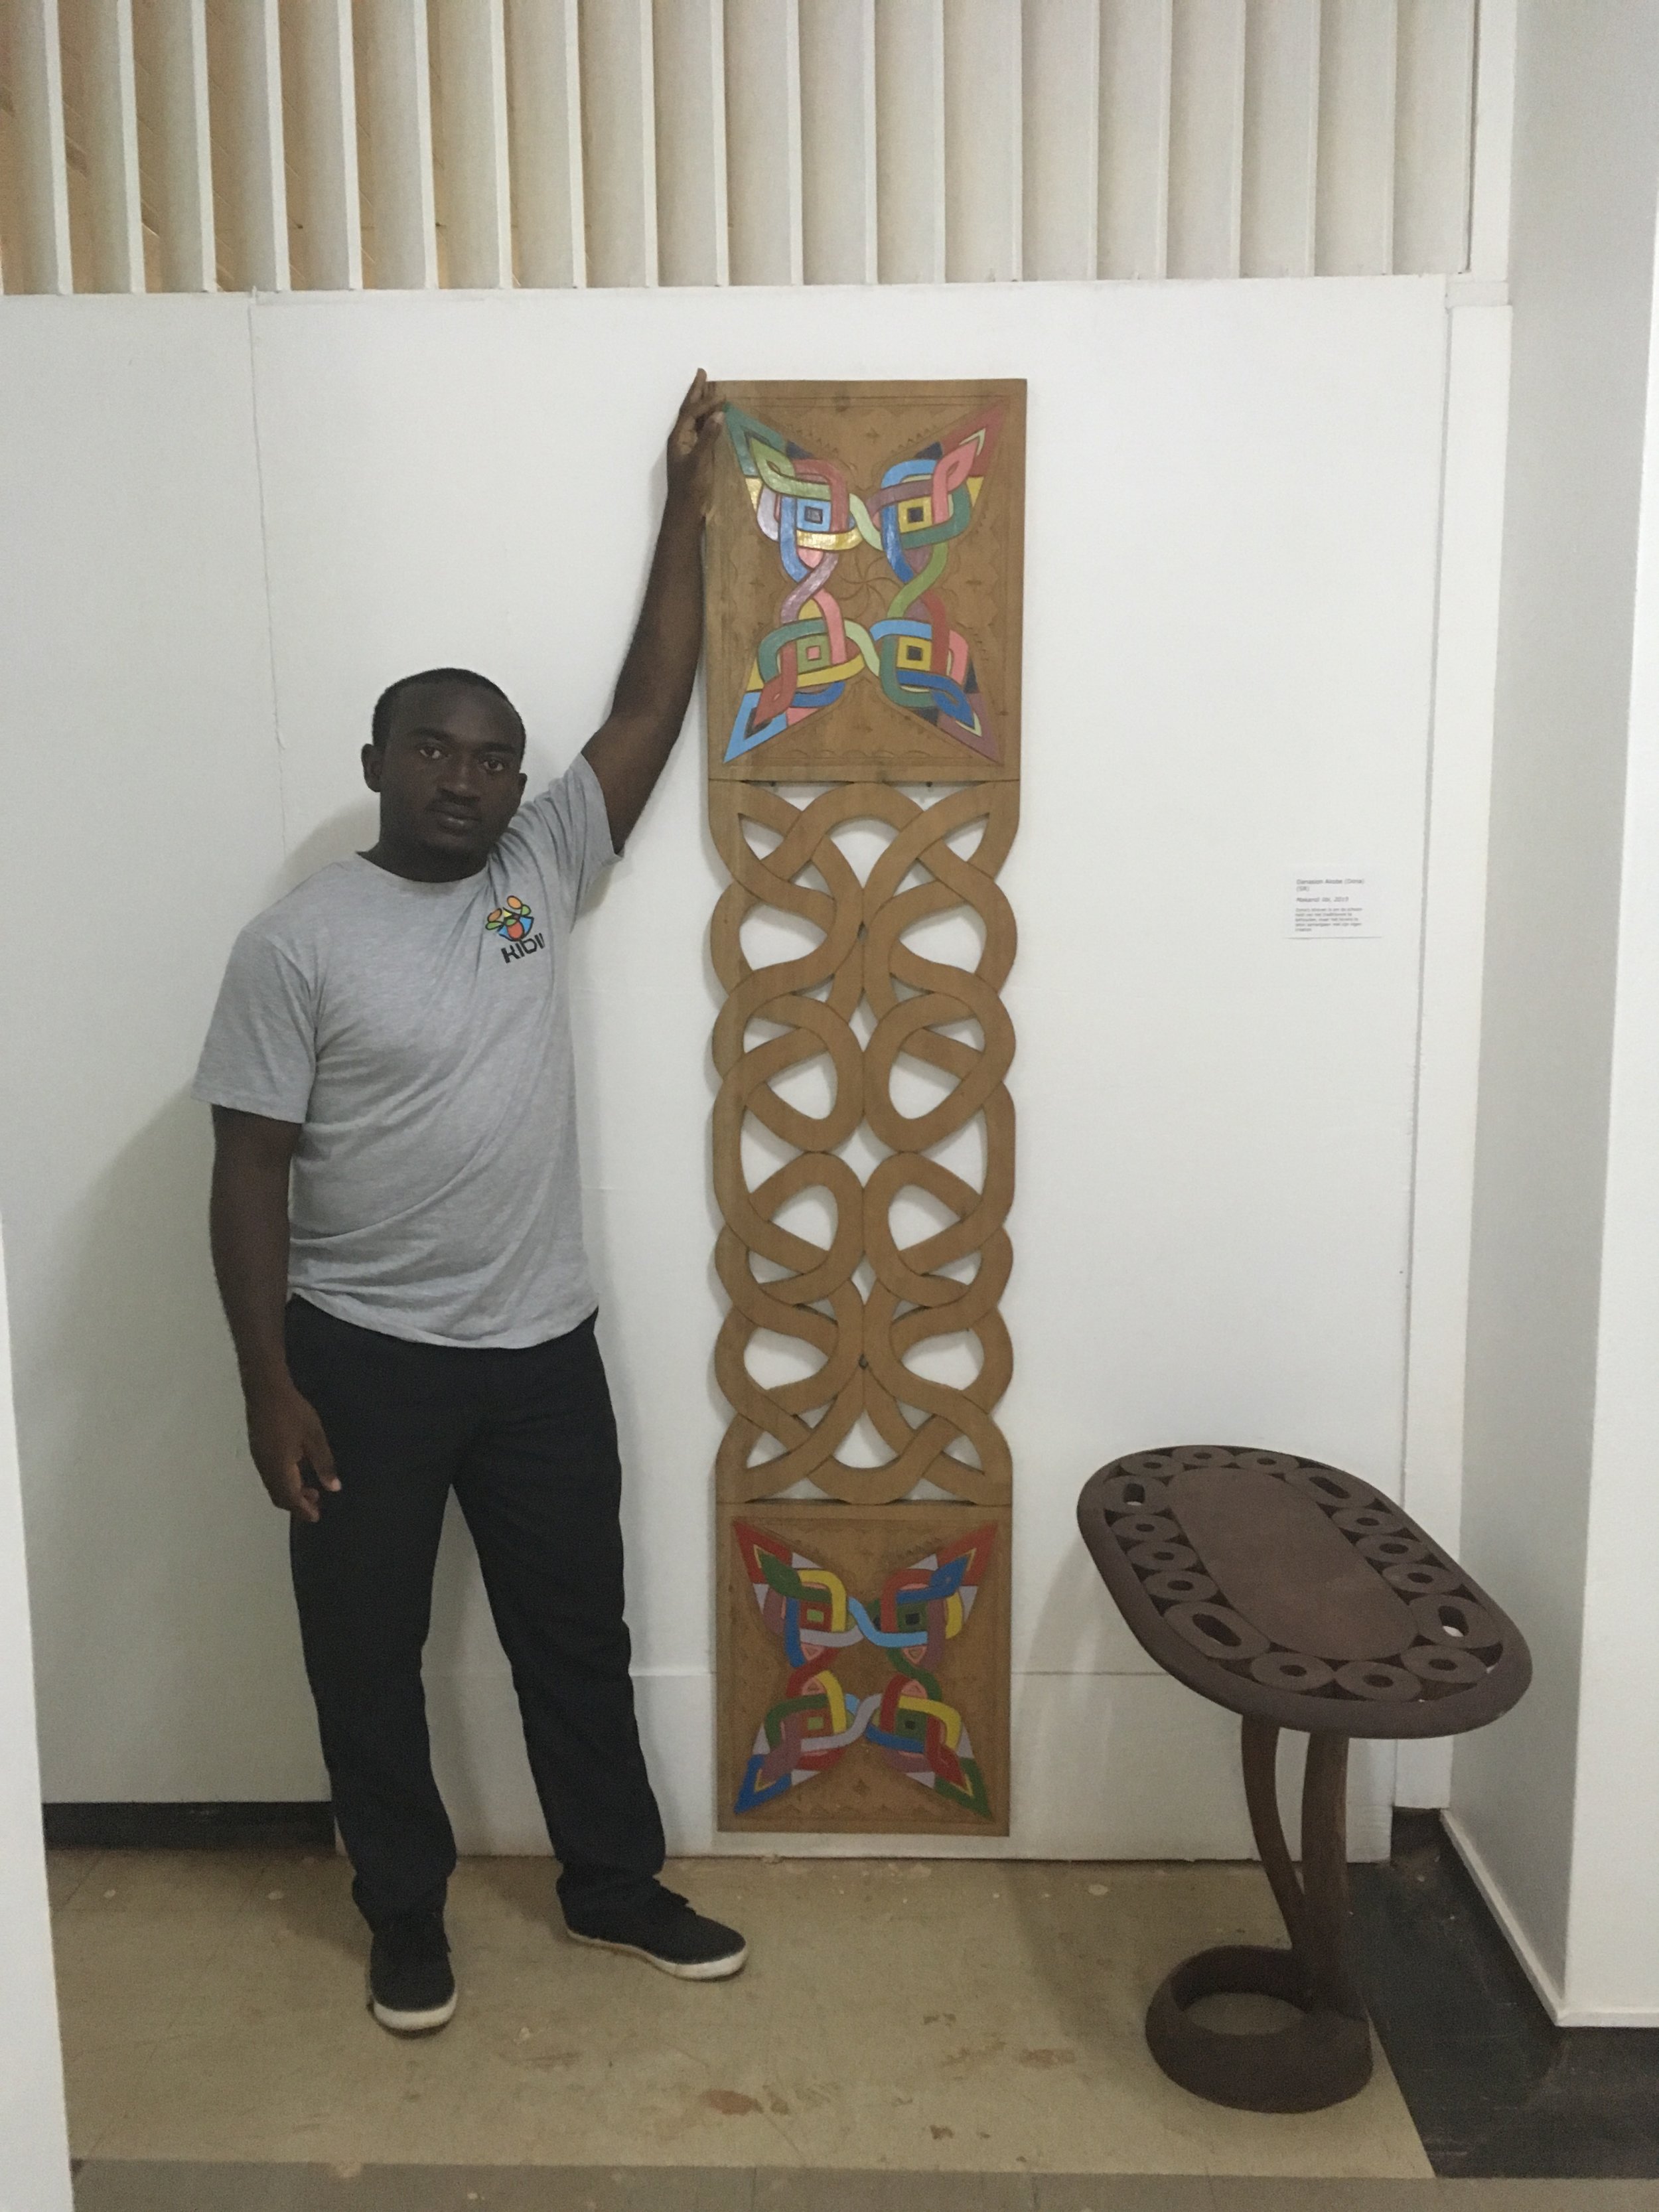  Inside CAMM: Wadell Akobe with tembe (traditional Maroon art) made by him and his father, Dona Akobe. 